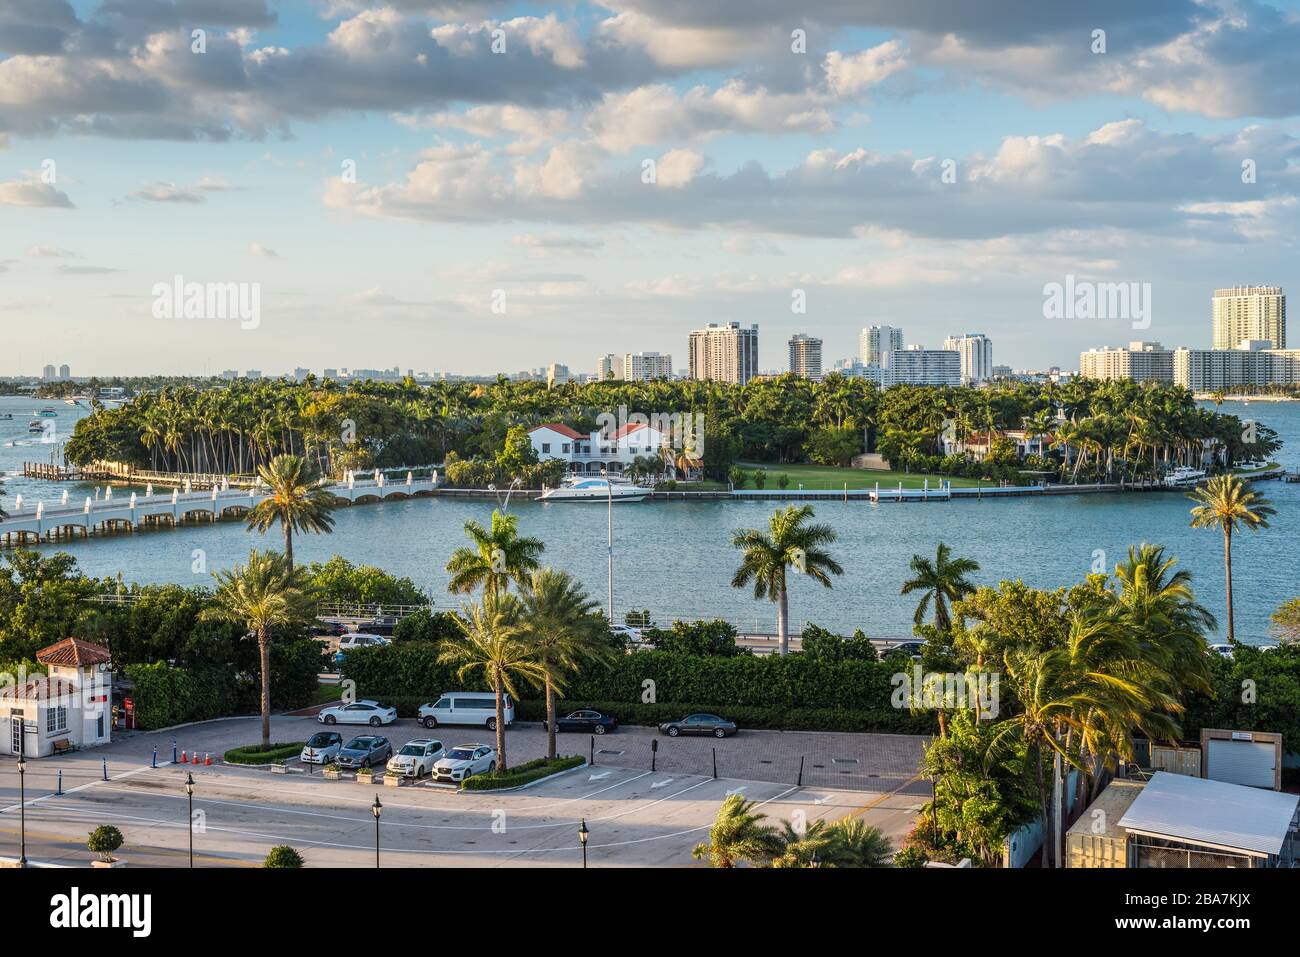 Miami, FL, United States - April 20, 2019:  View of MacArthur Causeway and the Star Island from the cruise ship at Biscayne Bay in Miami, Florida, Uni Stock Photo